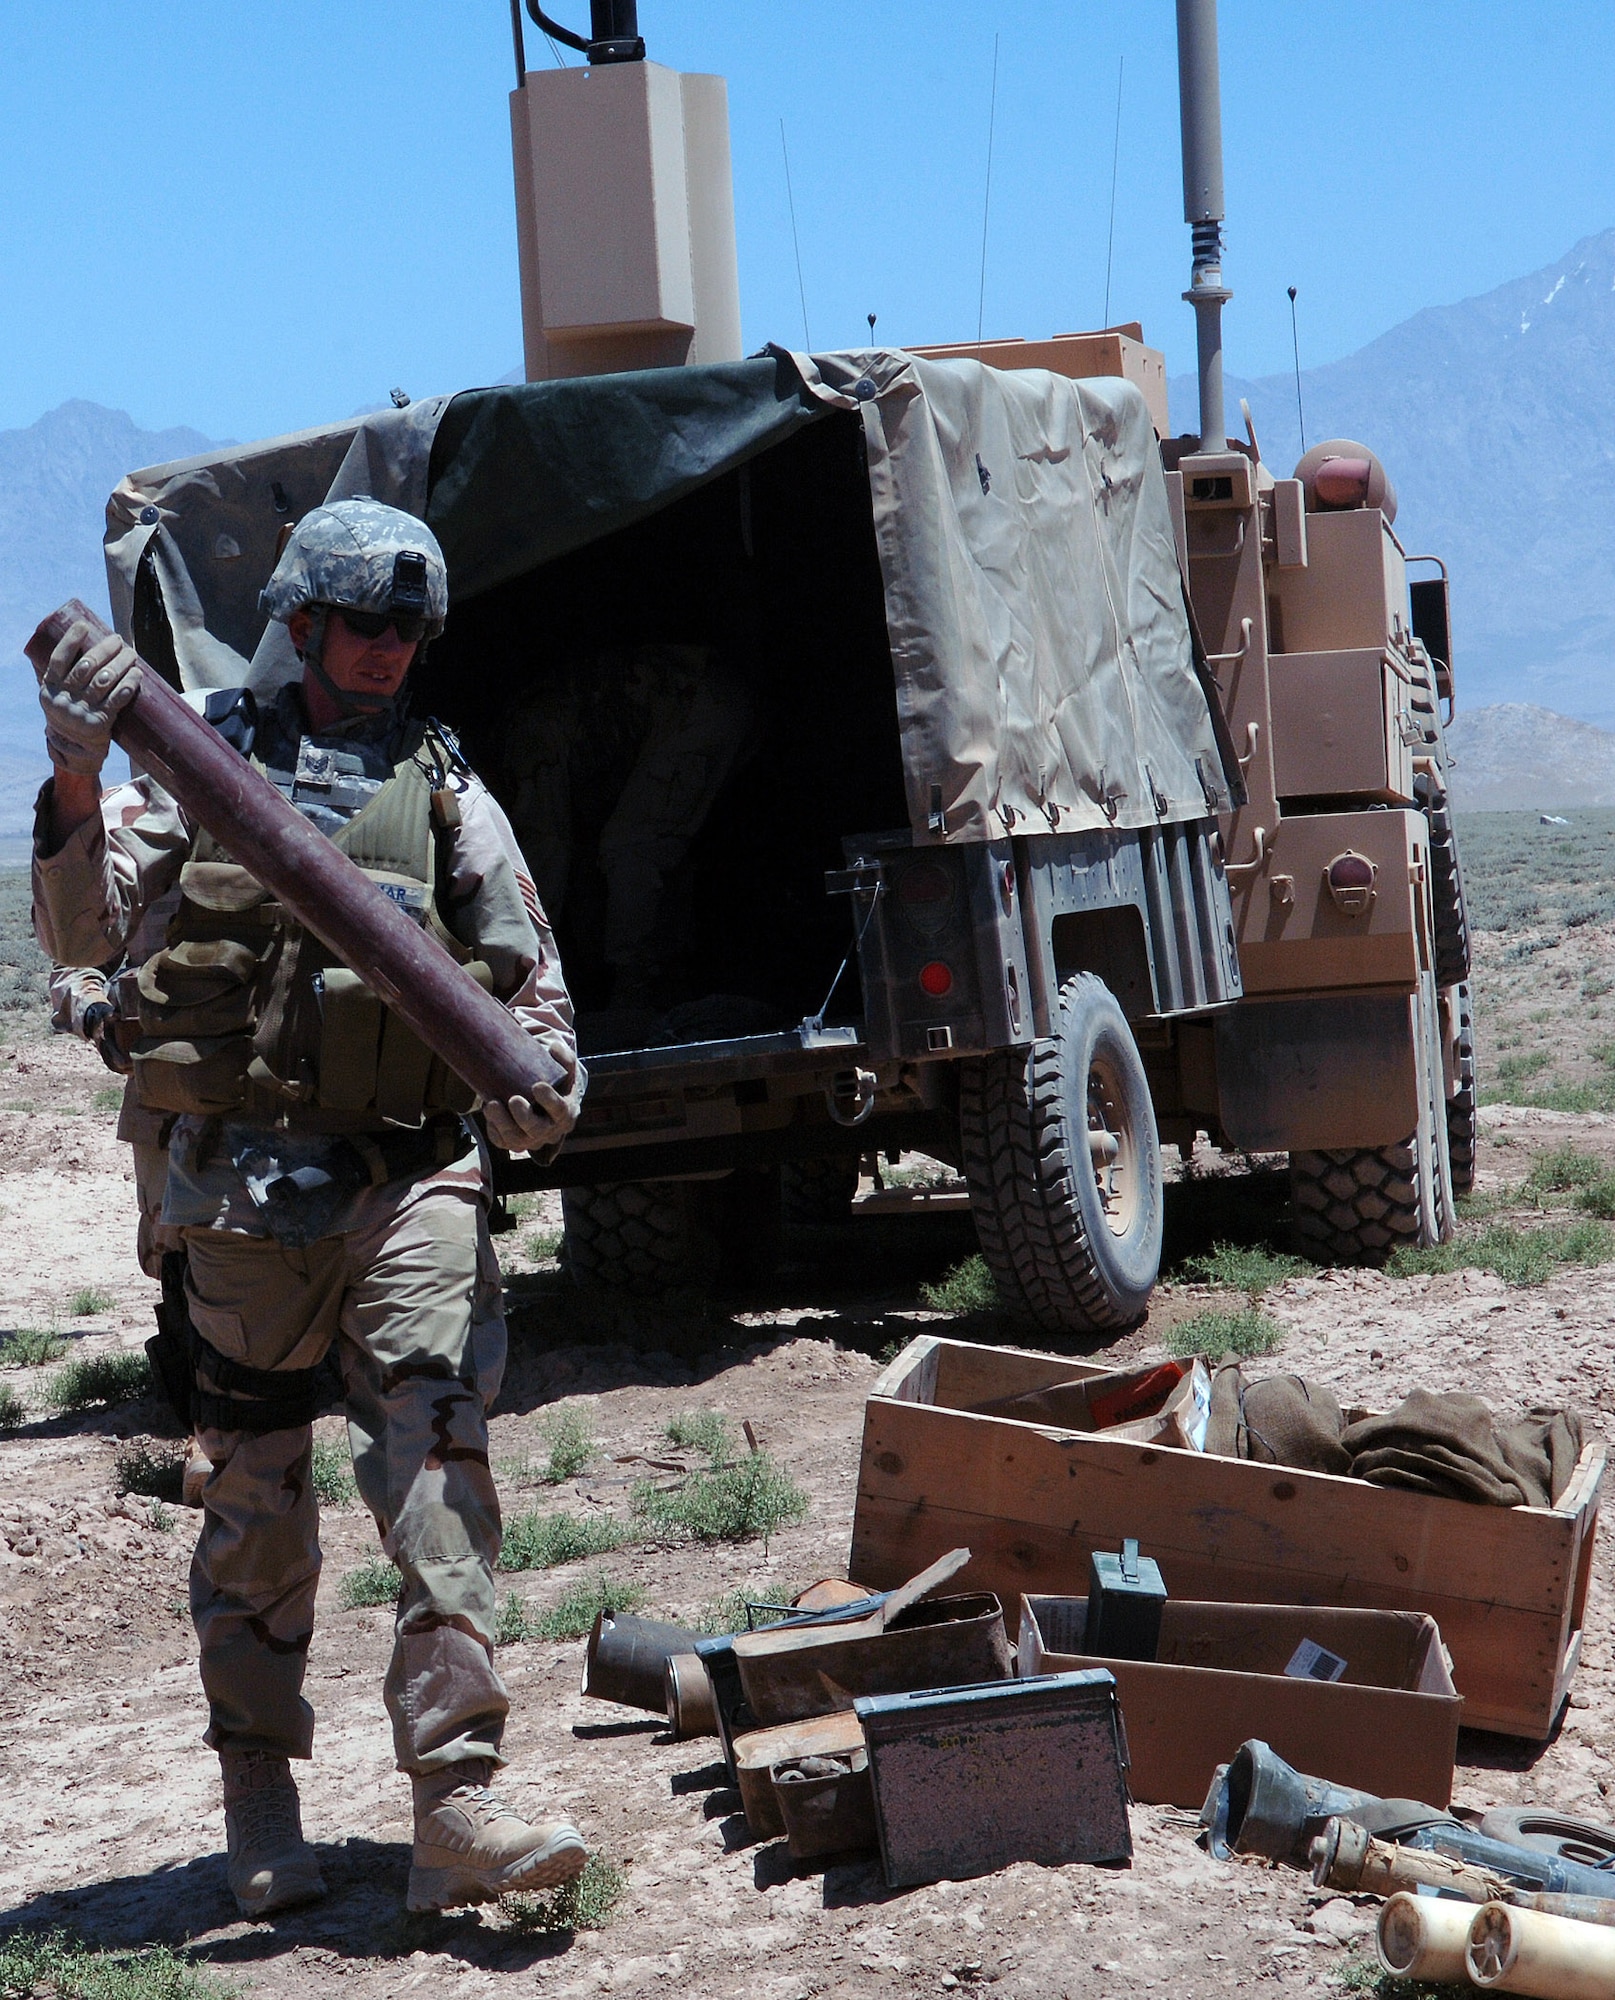 Staff Sgt. Rick Palmar, 755th Expeditionary Explosive Ordnance Disposal assistant team lead, helps unload and arrange more than 1,000 pounds of stored mines, munitions and weapons caches for a controlled detonation outside Bagram Airfield, Afghanistan June 13. (photo by Staff Sgt. Craig Seals)